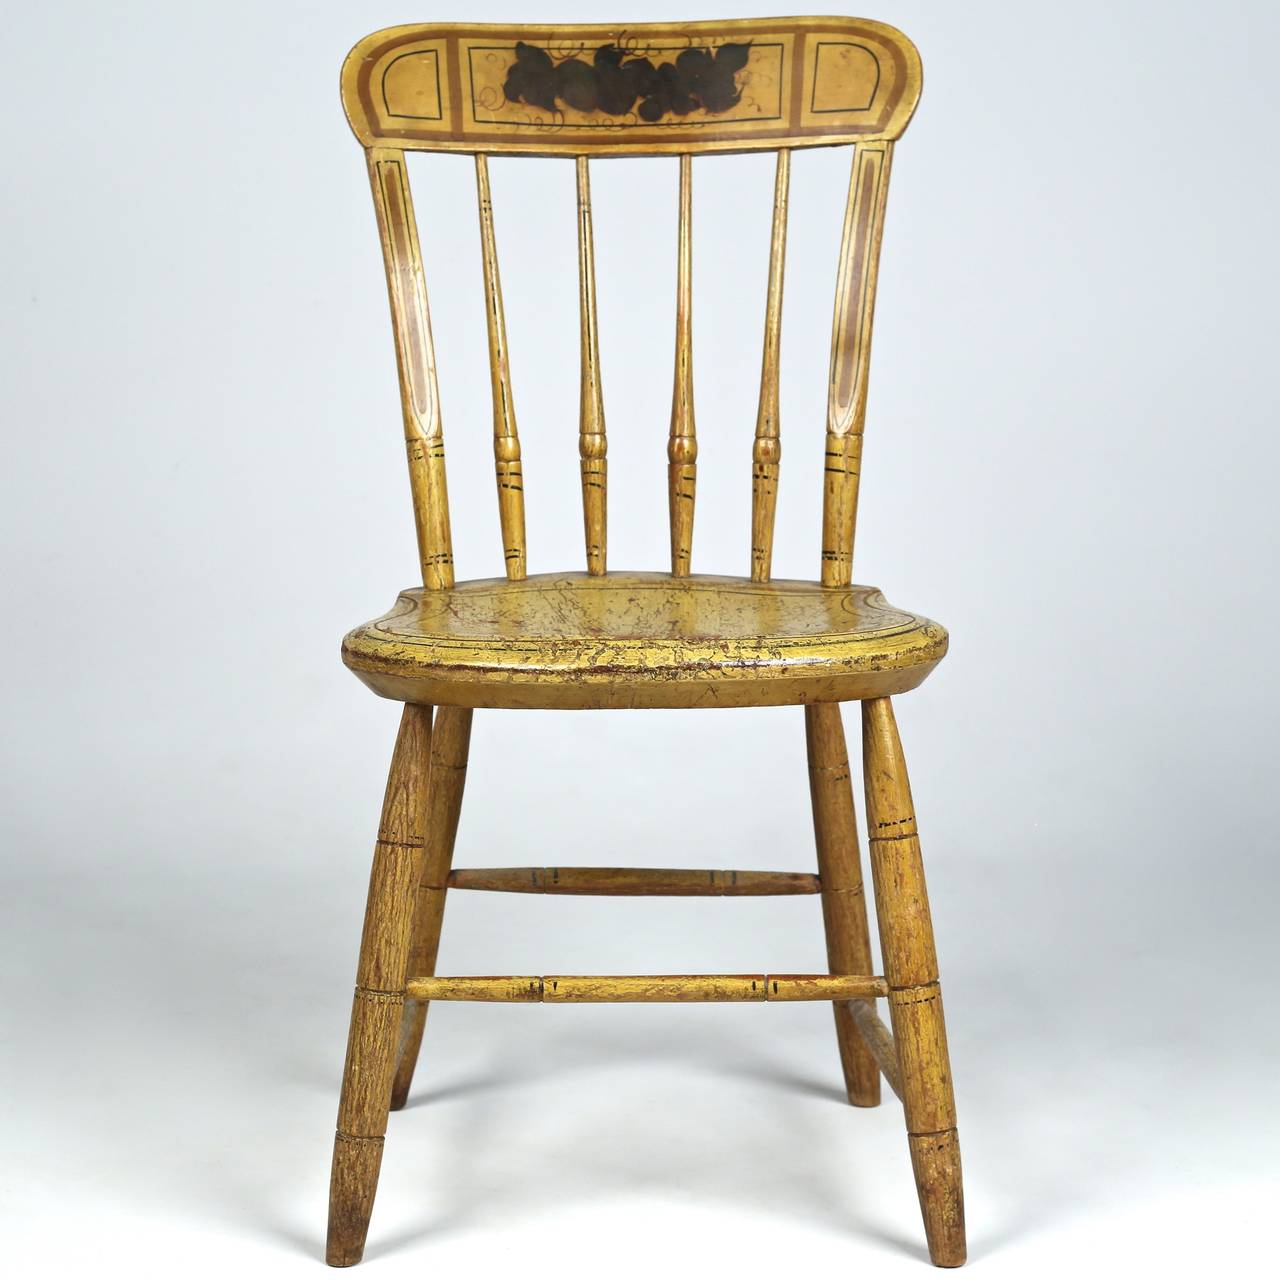 PAIR OF AMERICAN WINDSOR YELLOW PAINTED SIDE CHAIRS
